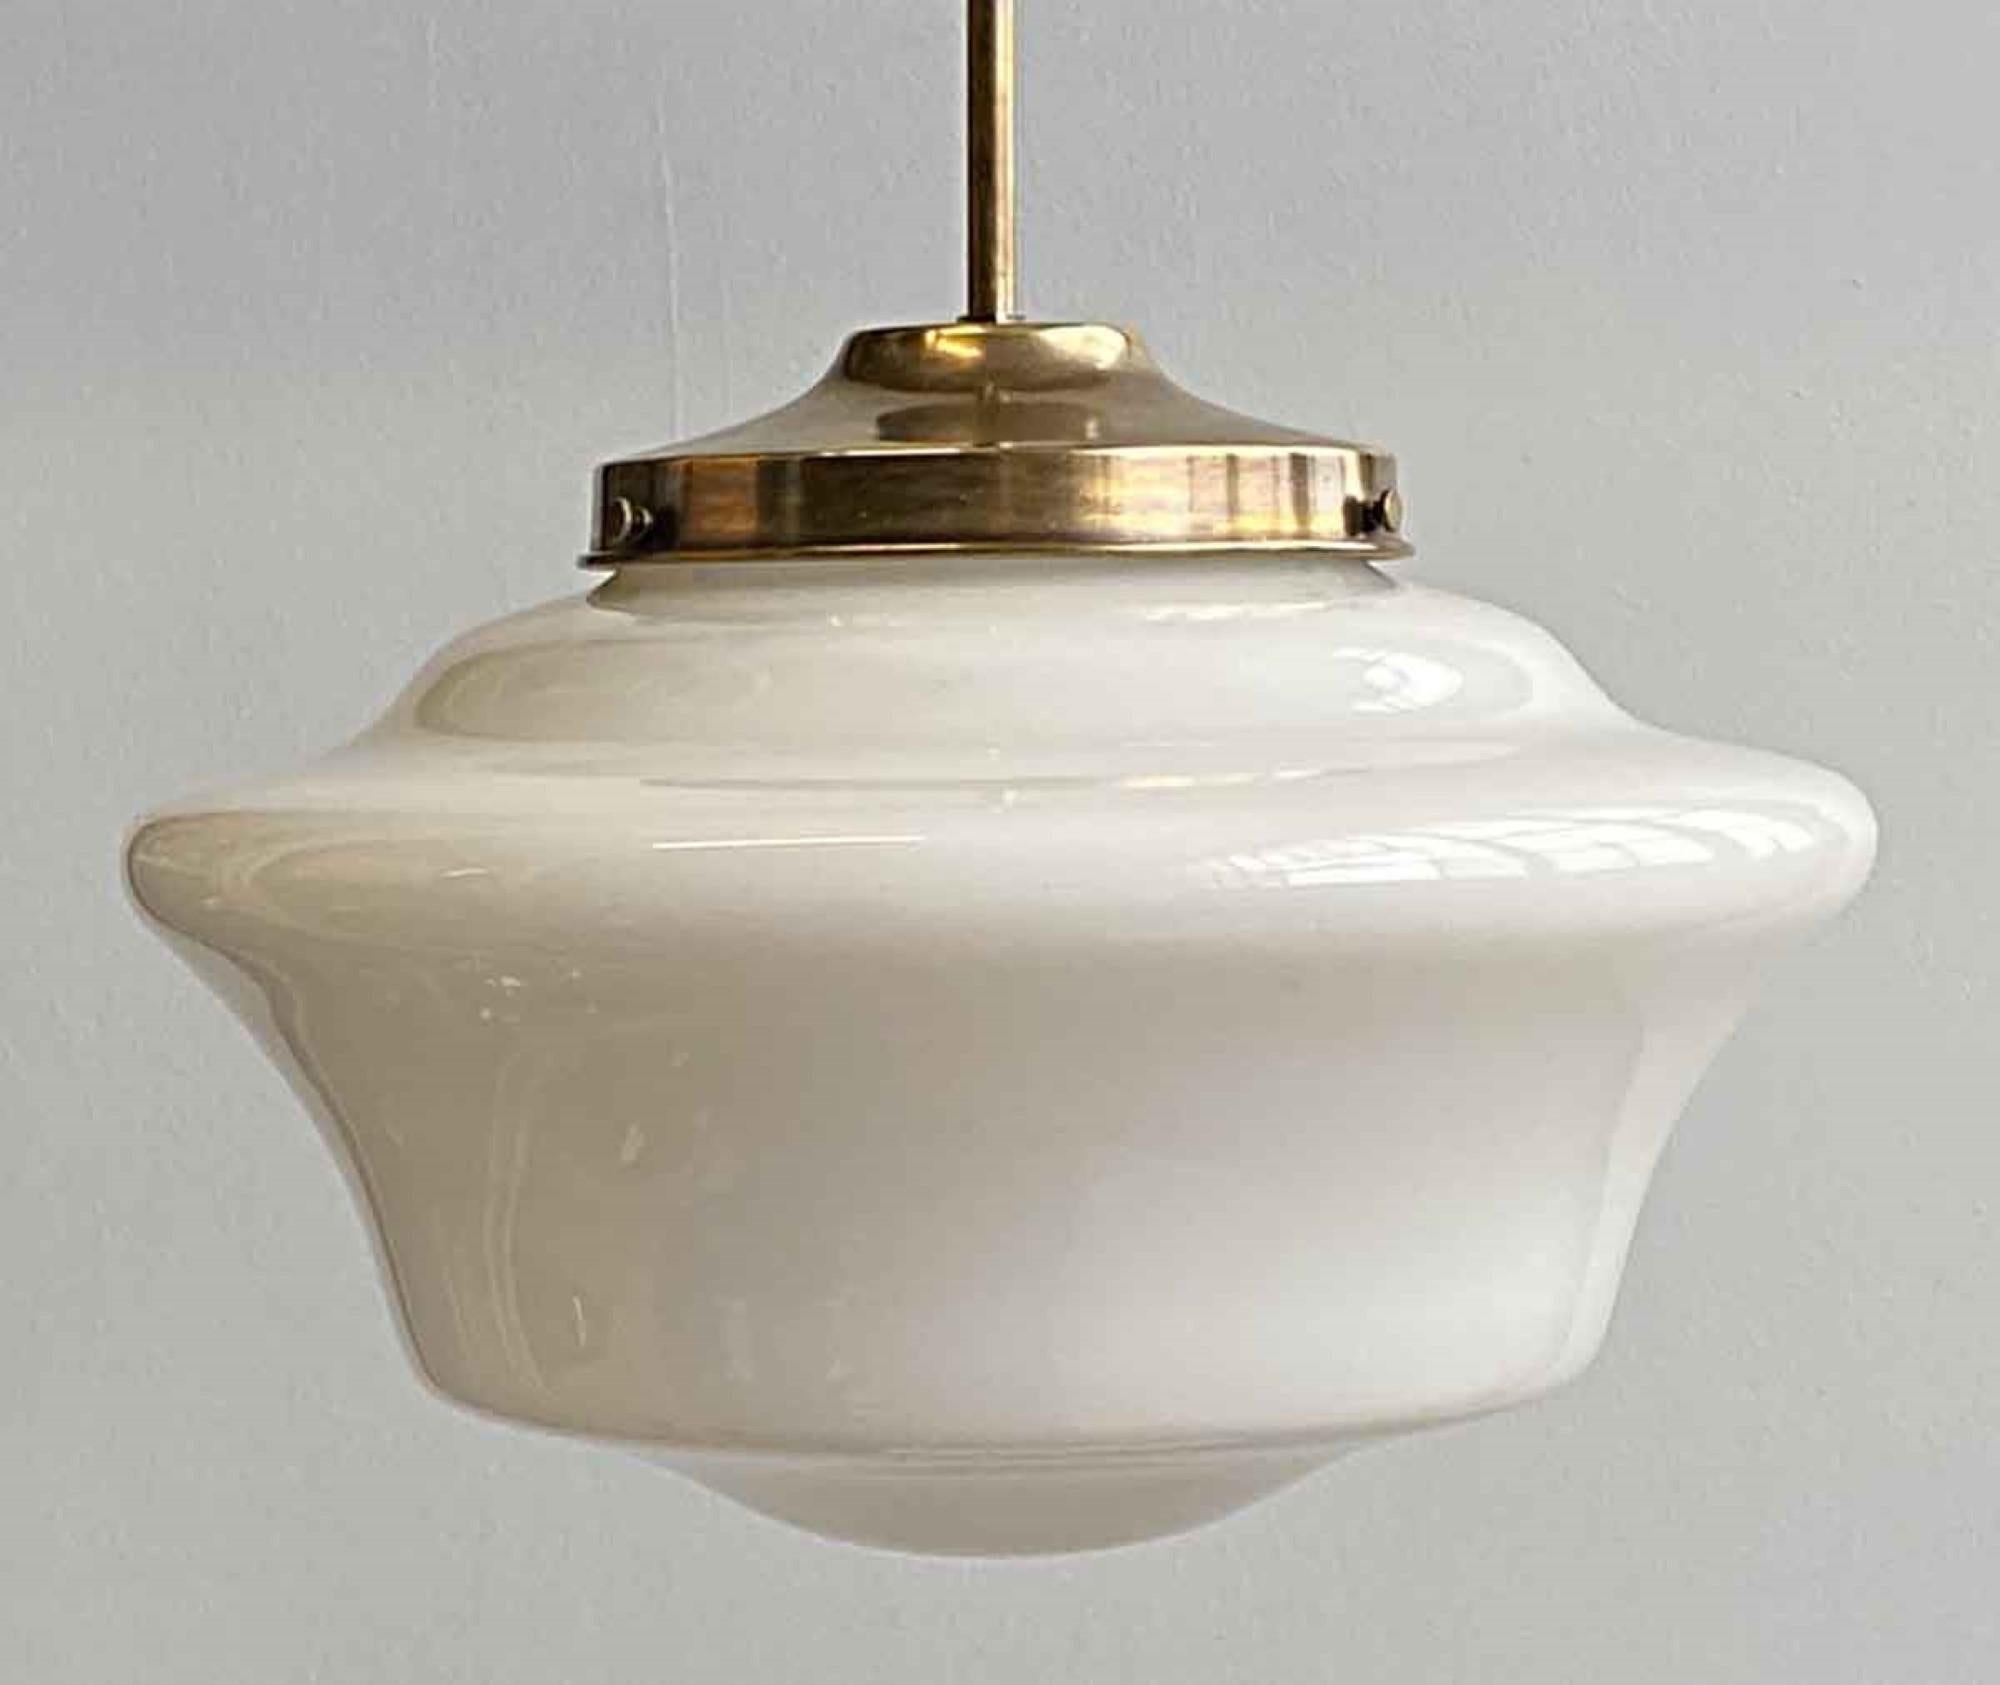 1920s white milk glass parlor style schoolhouse globe fitted with a newly made brass pole fitter and hardware. You can choose between a pole or chain fitter with a patina brass or brushed steel finish. Small quantity available at time of posting.